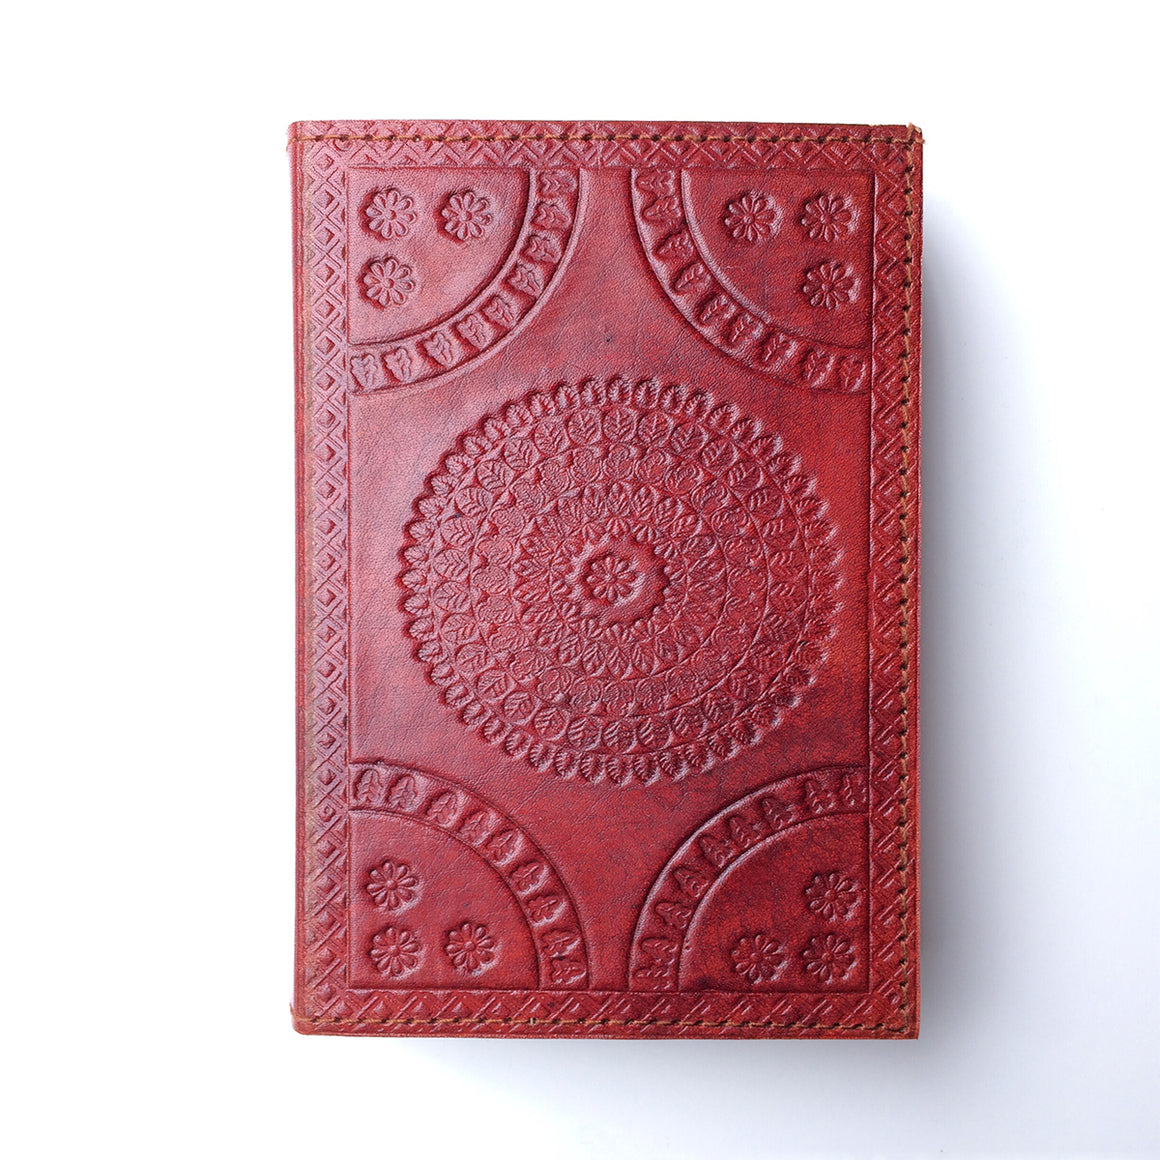 Fairtrade Leather Notebook with embossed Tree of Life design / Handmade Indian Leather Diary / Sketchbook / Journal - Front Cover